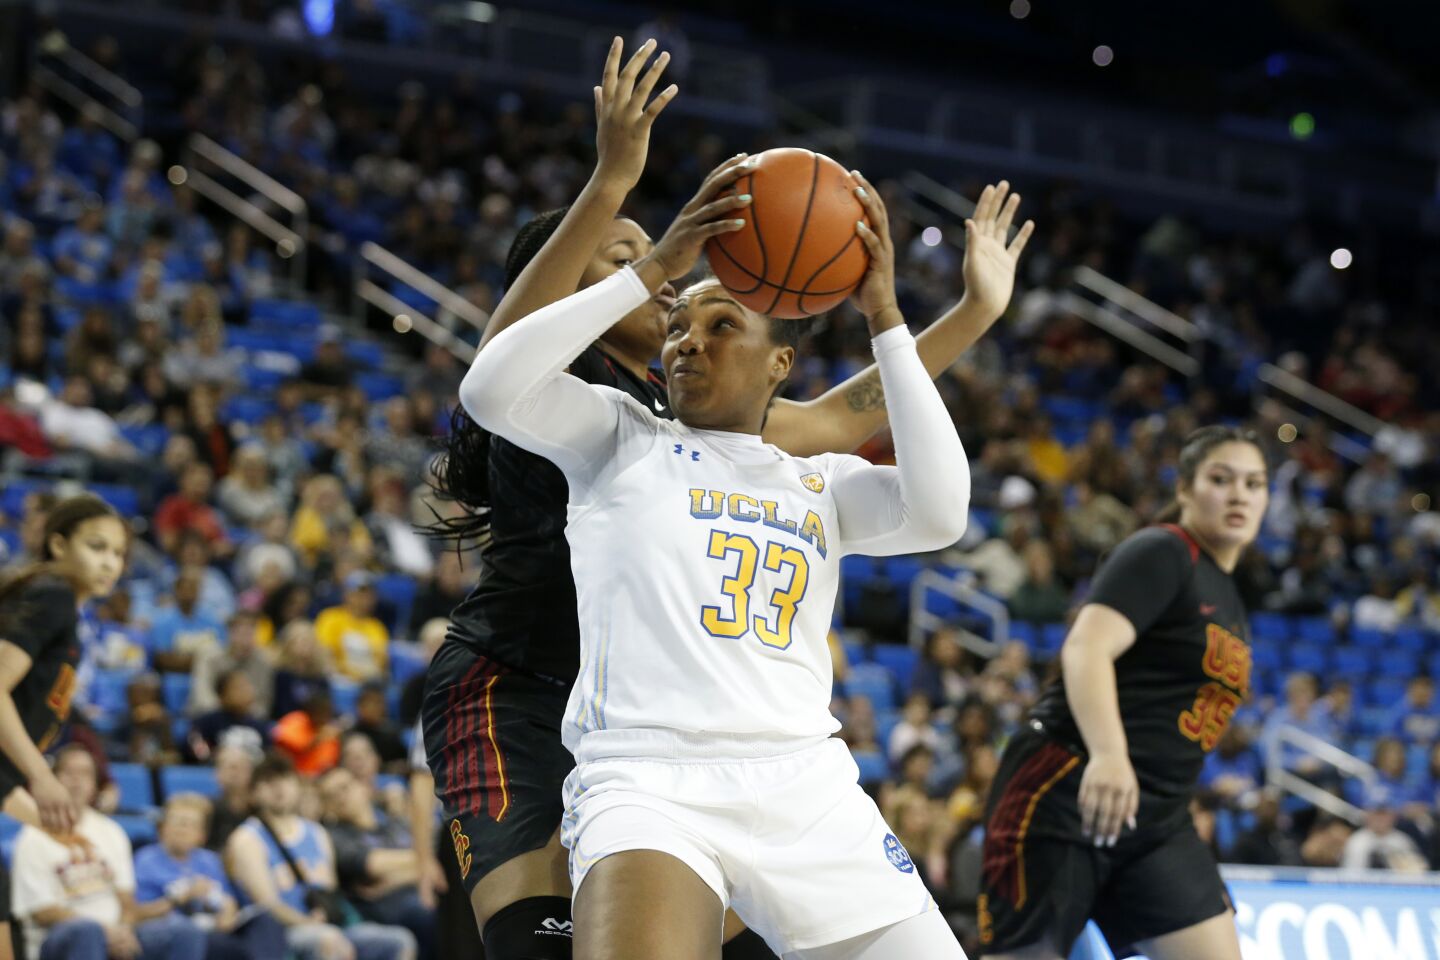 UCLA forward Lauryn Miller (33) drives to the basket in front of USC center Angel Jackson during the second half.